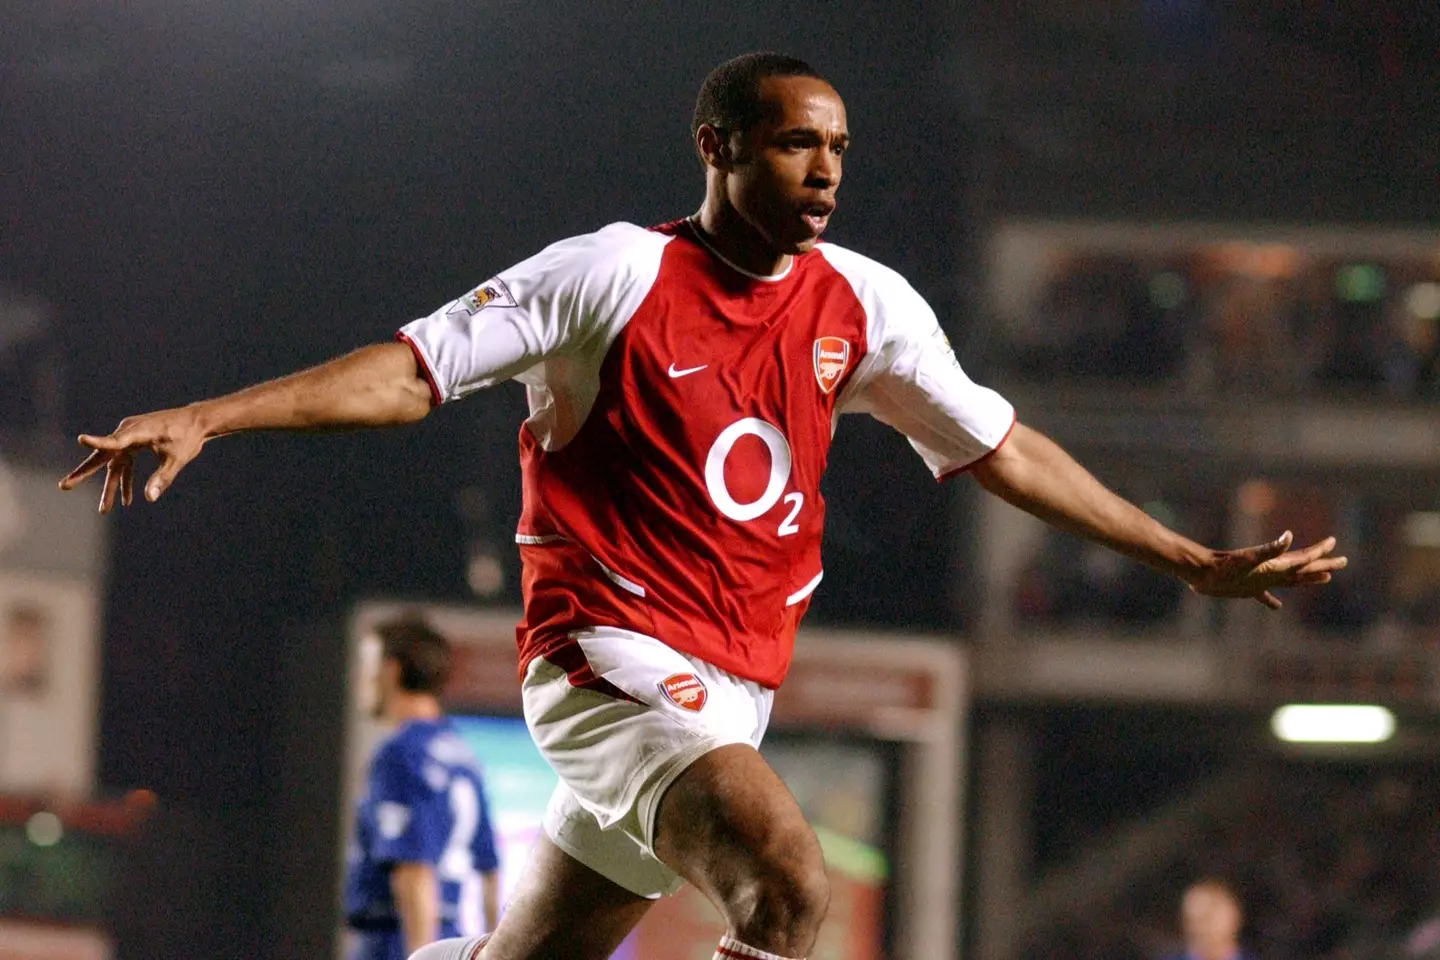 Thierry Henry has moved into coaching and punditry after retirement (Image: Alamy)